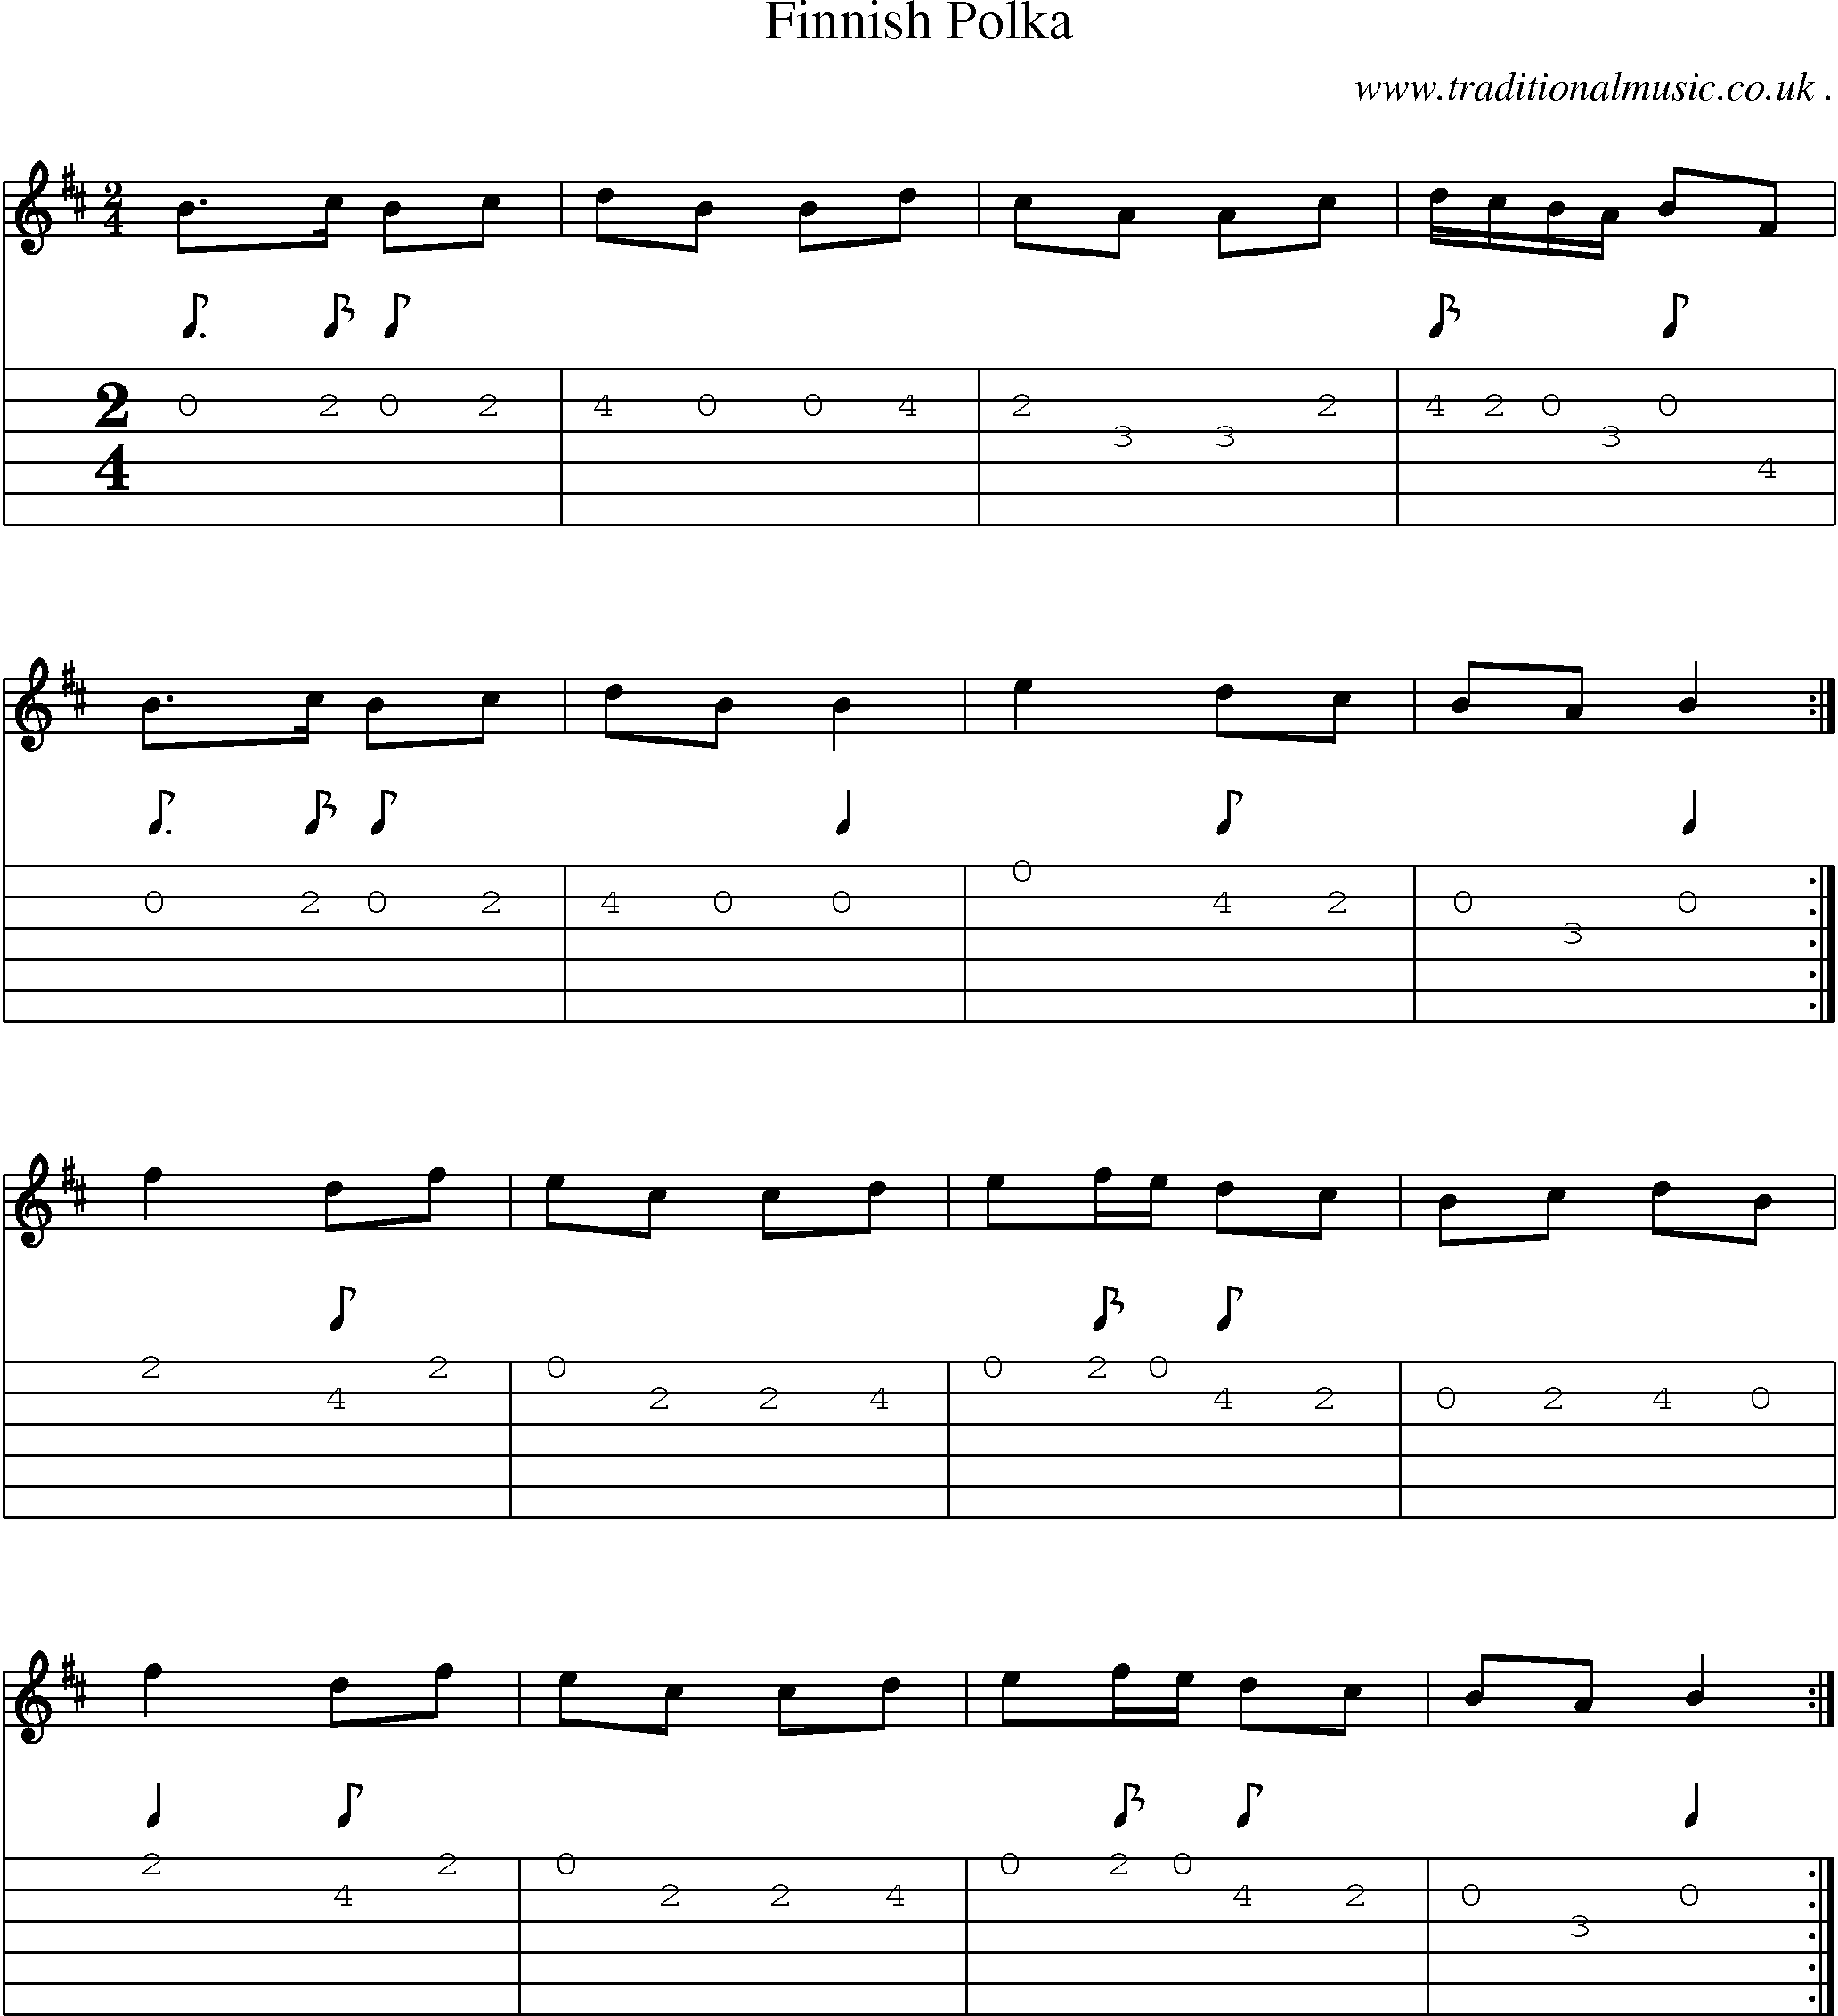 Sheet-Music and Guitar Tabs for Finnish Polka